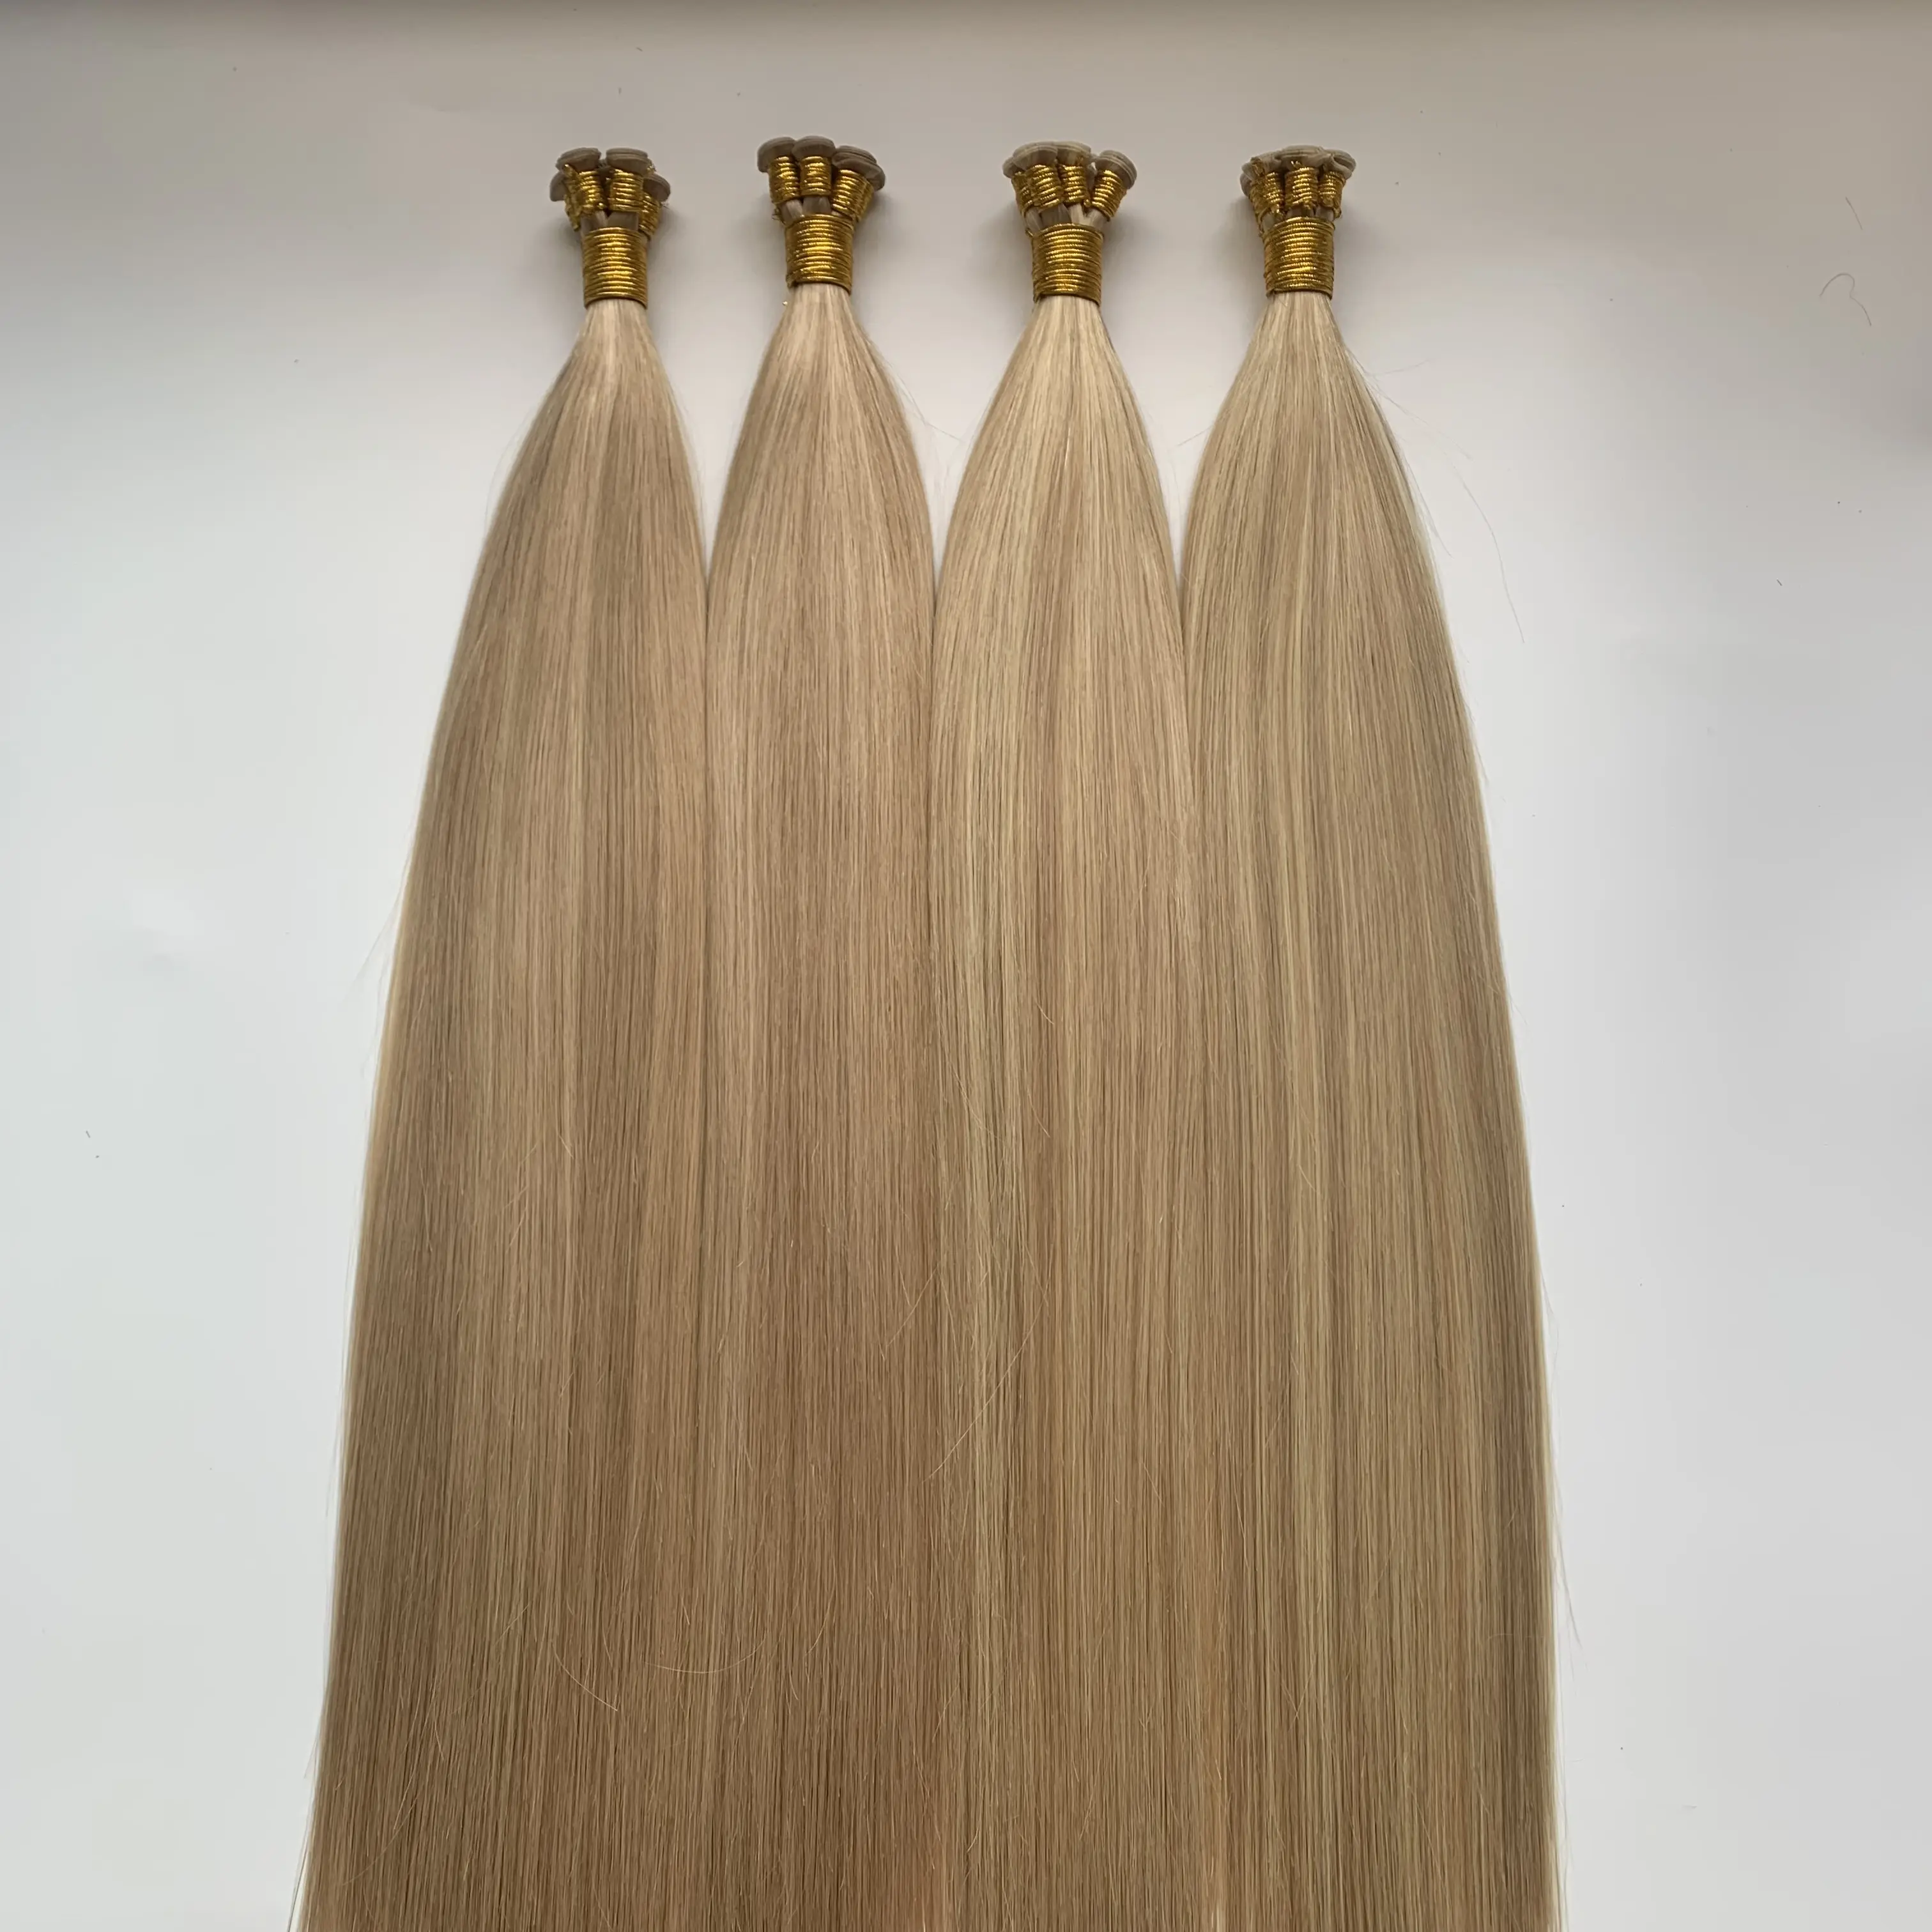 Hot Selling 100% Human Virgin Remy Cuticle Aglined Russian Hair Can Be Cut Genius Weft Hair Extensions